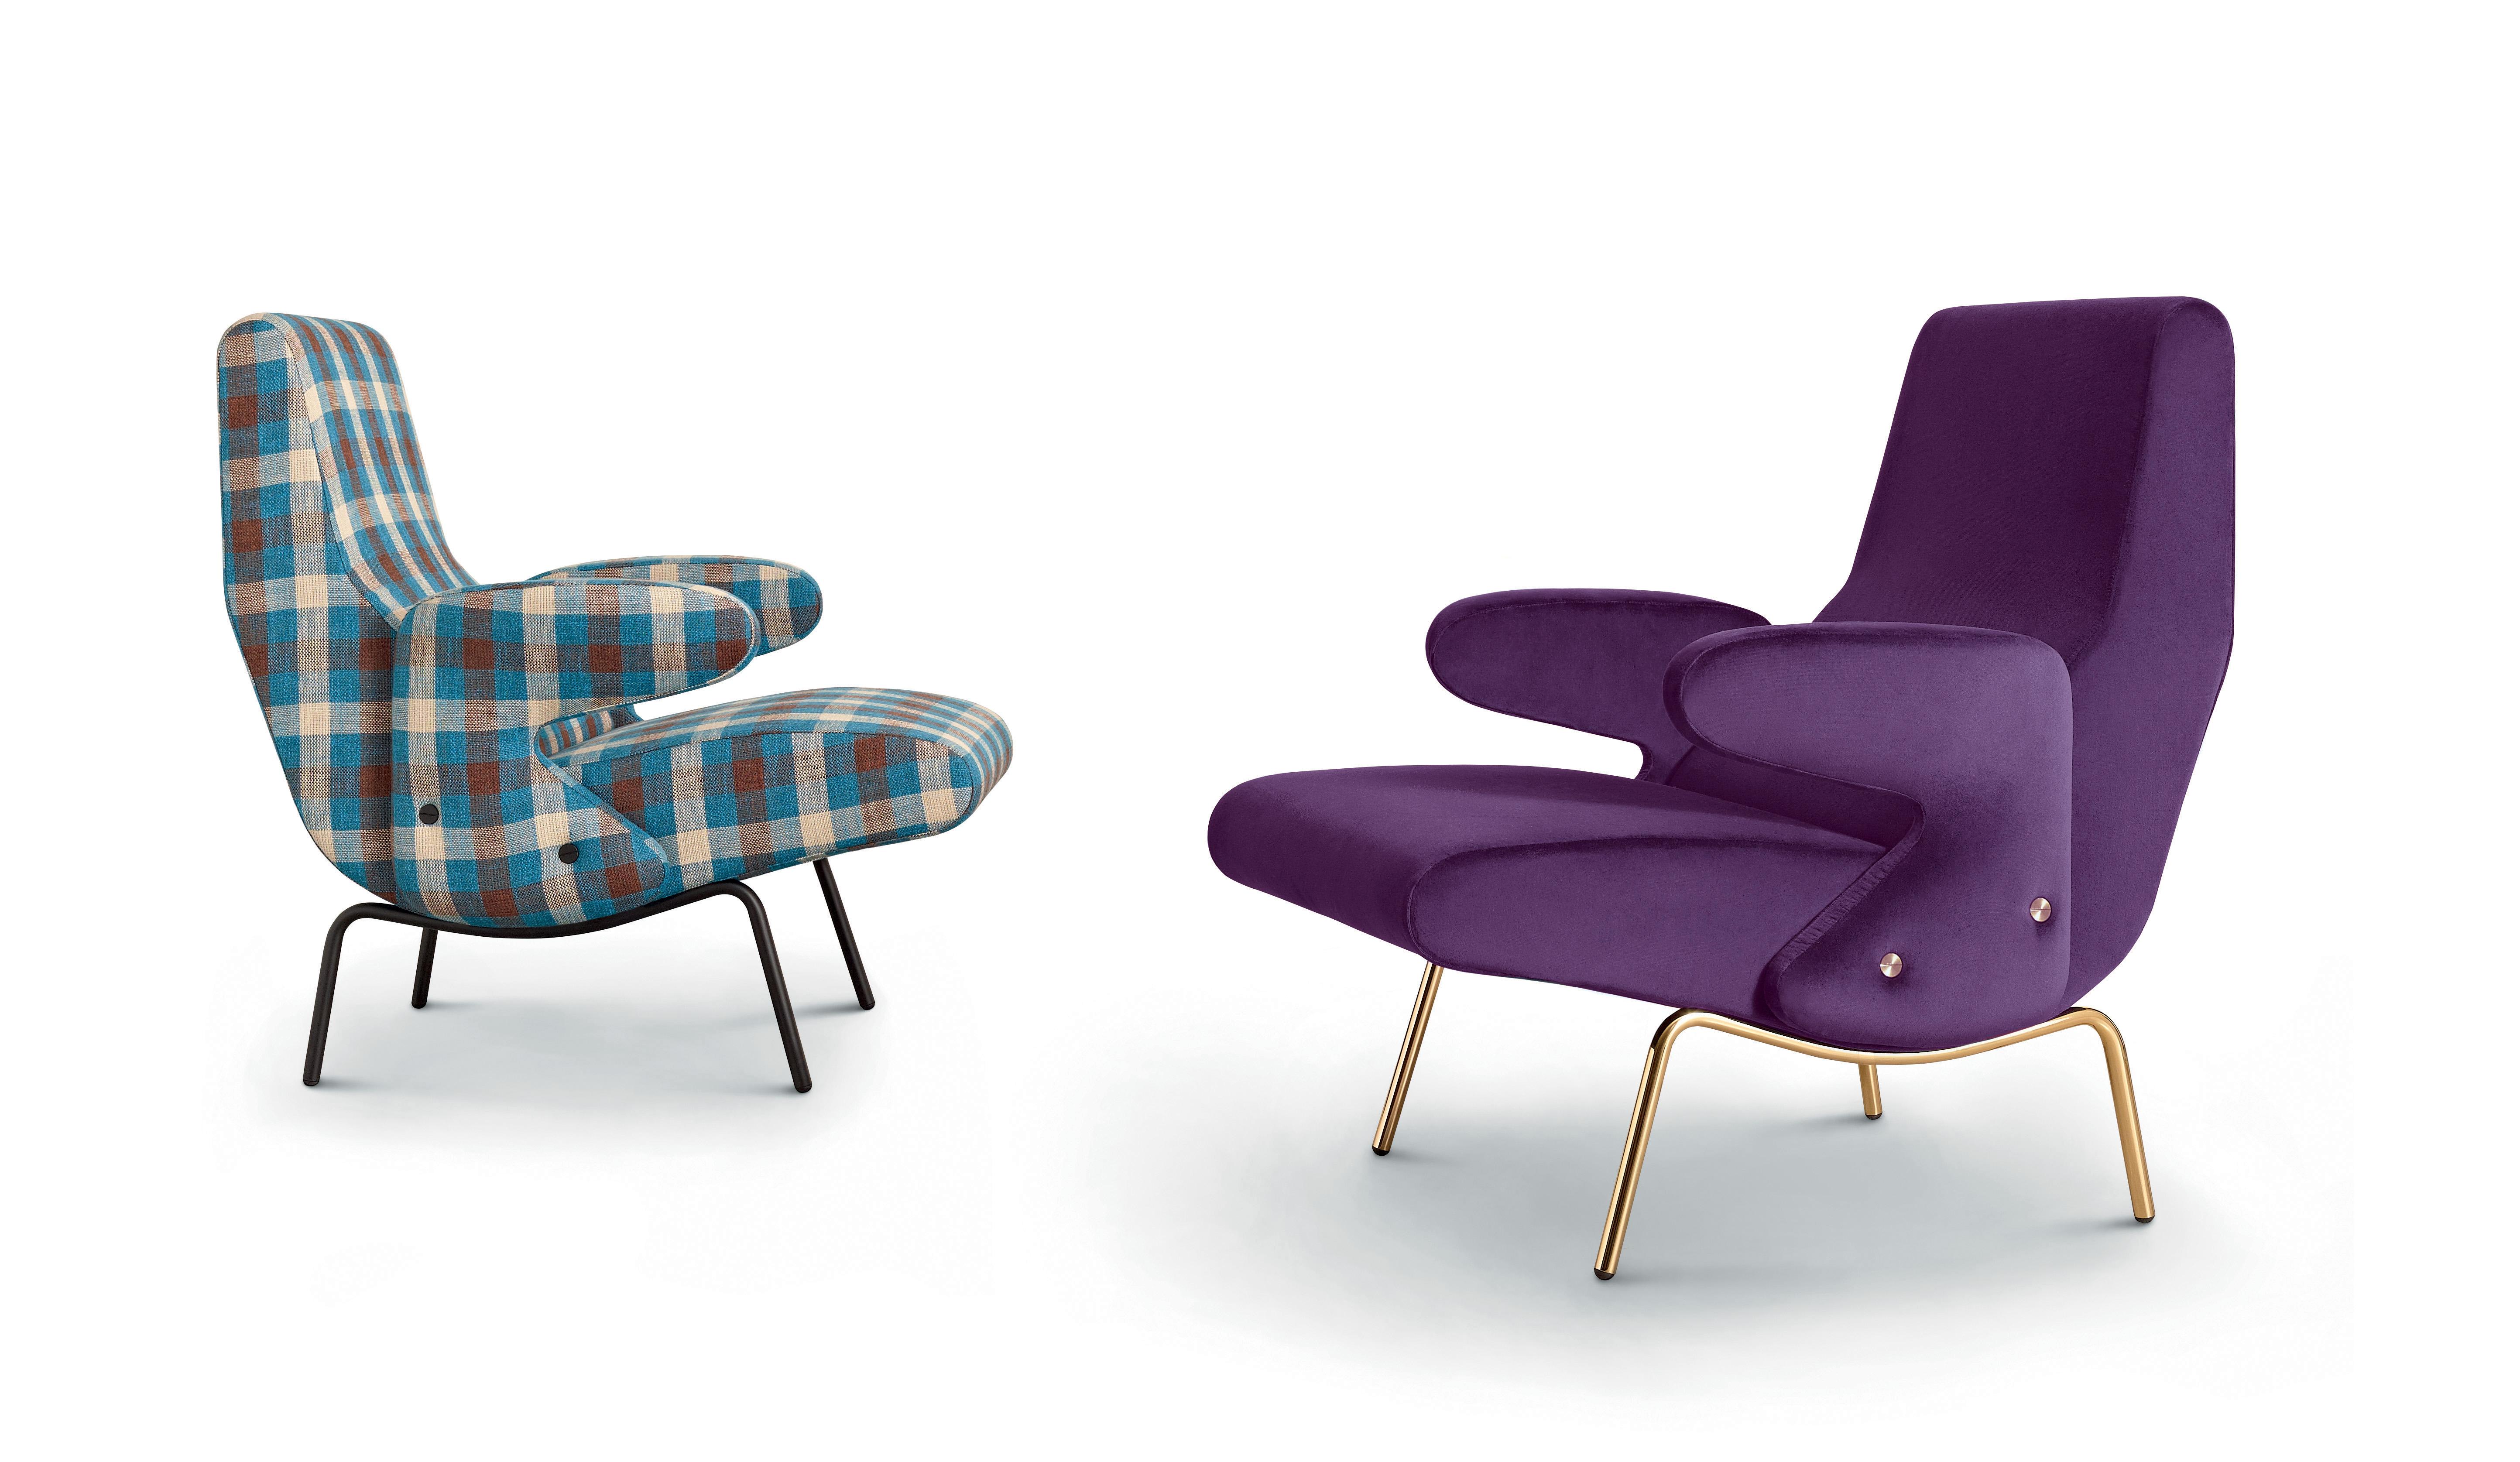 Delfino armchair by Erberto Carboni is a significant example of the so-called 